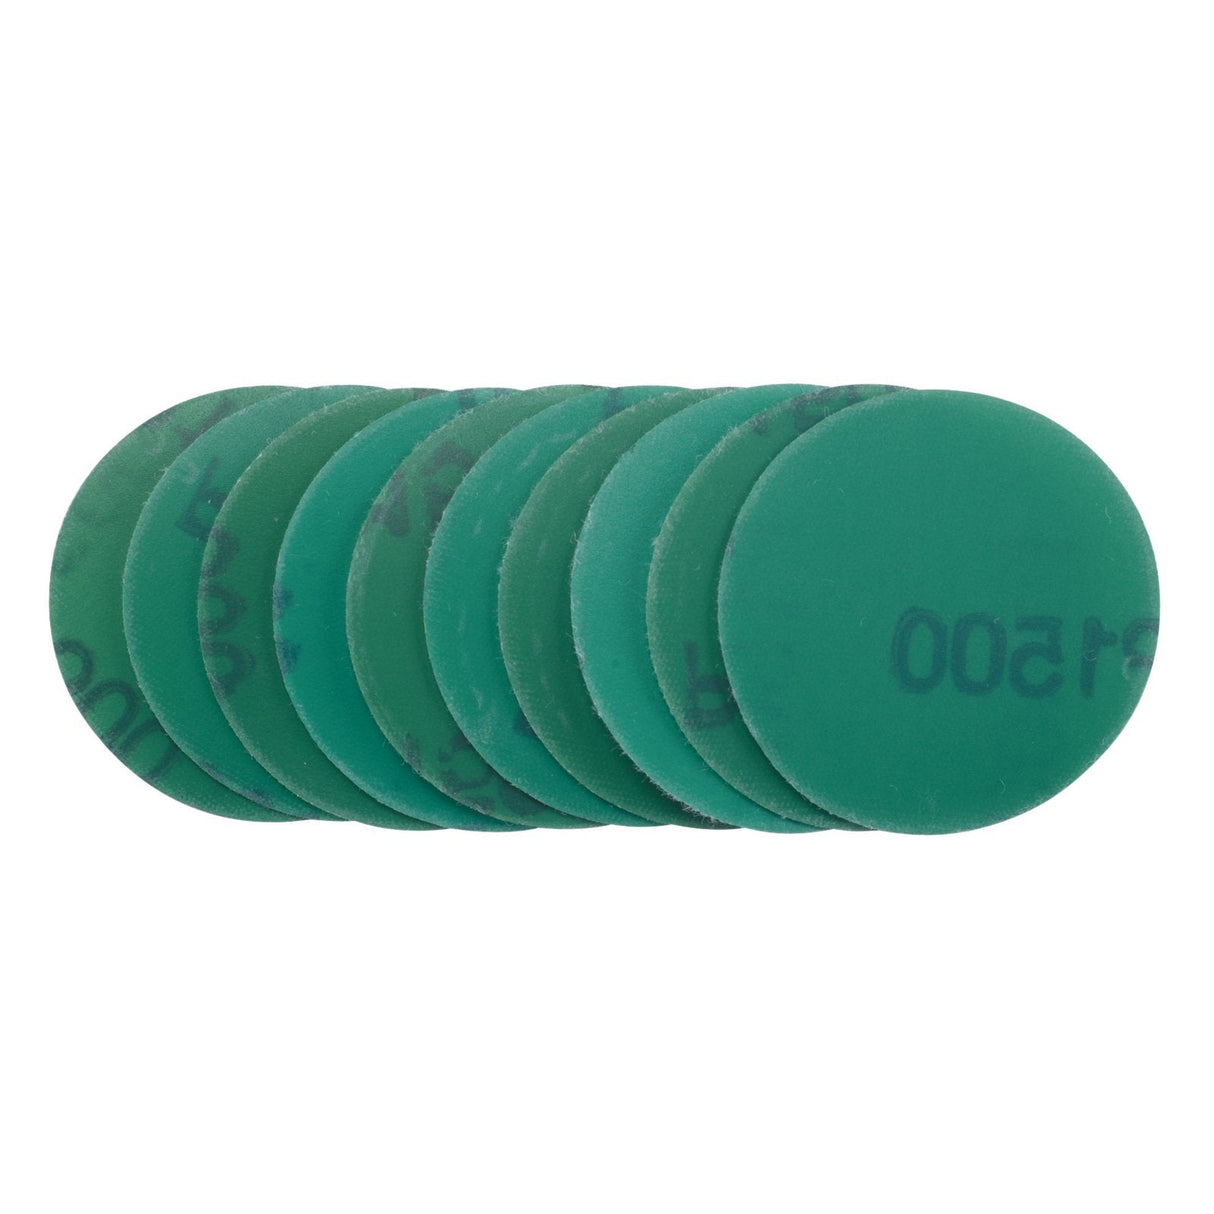 Draper Wet And Dry Sanding Discs With Hook And Loop, 50mm, 1500 Grit (Pack Of 10) - SDWOD50 - Farming Parts